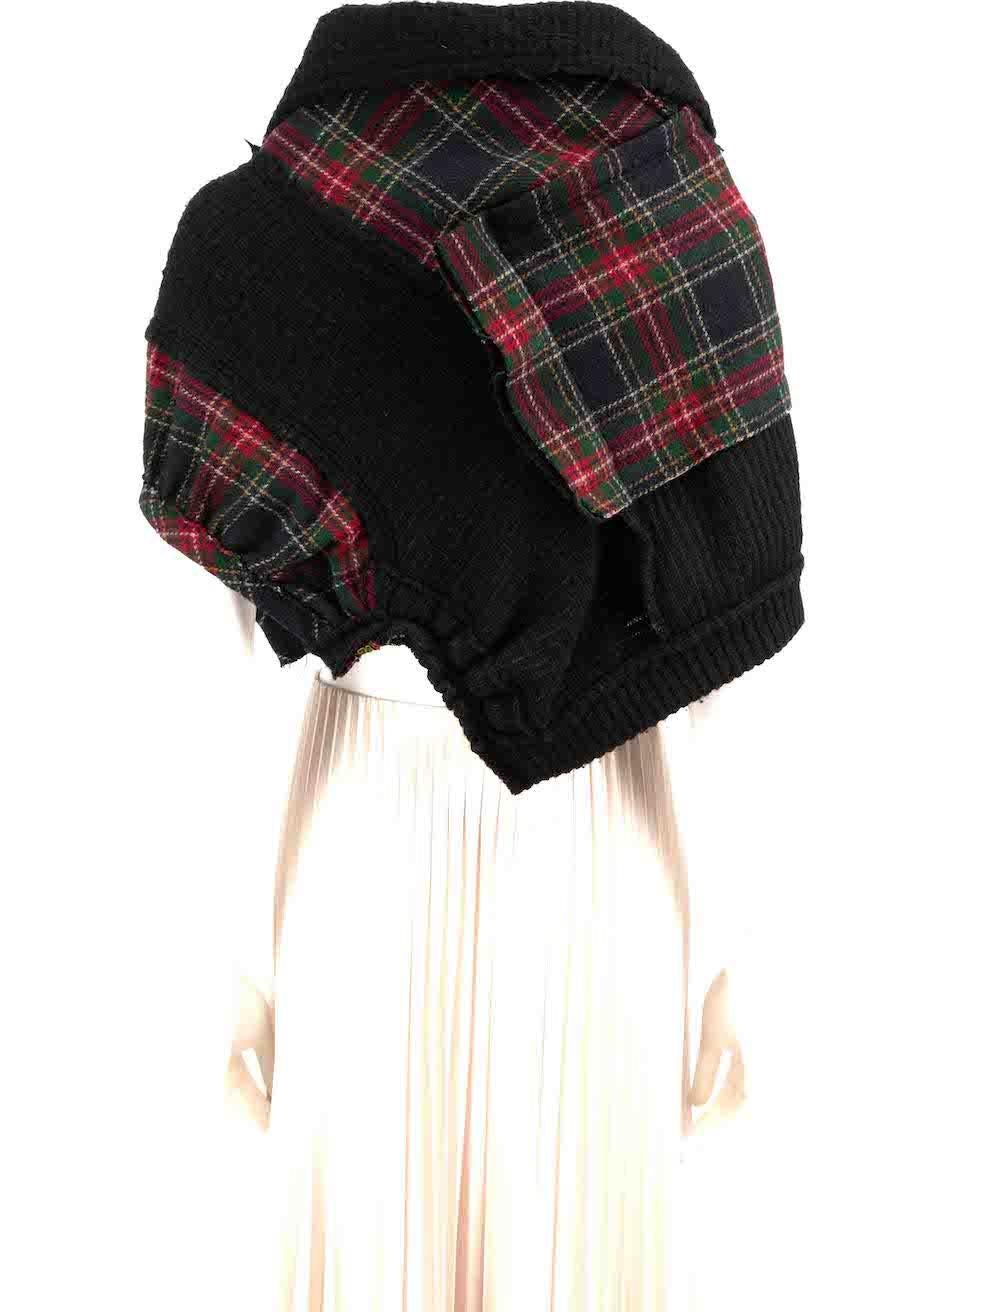 Yohji Yamamoto Black Wool Reconstructed Tartan Cape Size S In Good Condition For Sale In London, GB